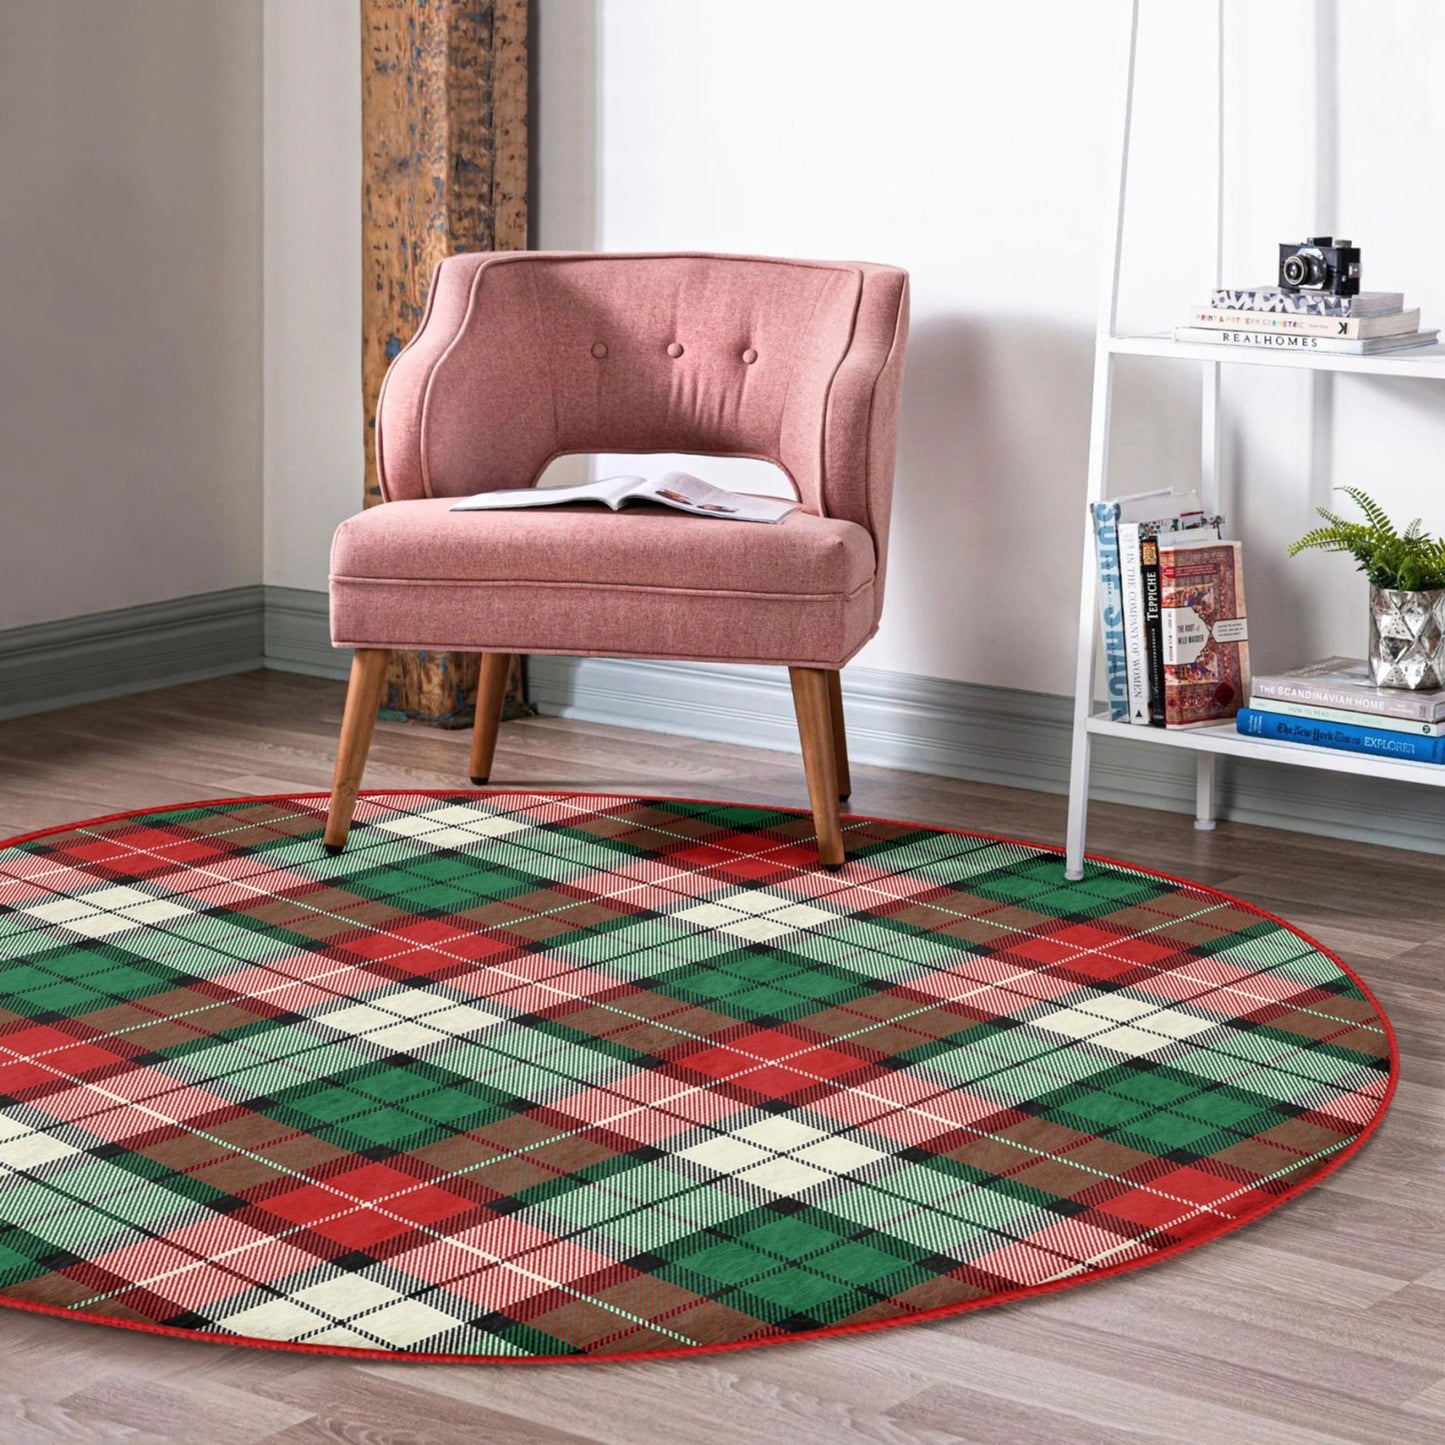 Round Patterned Floor Rug - Cozy Accent